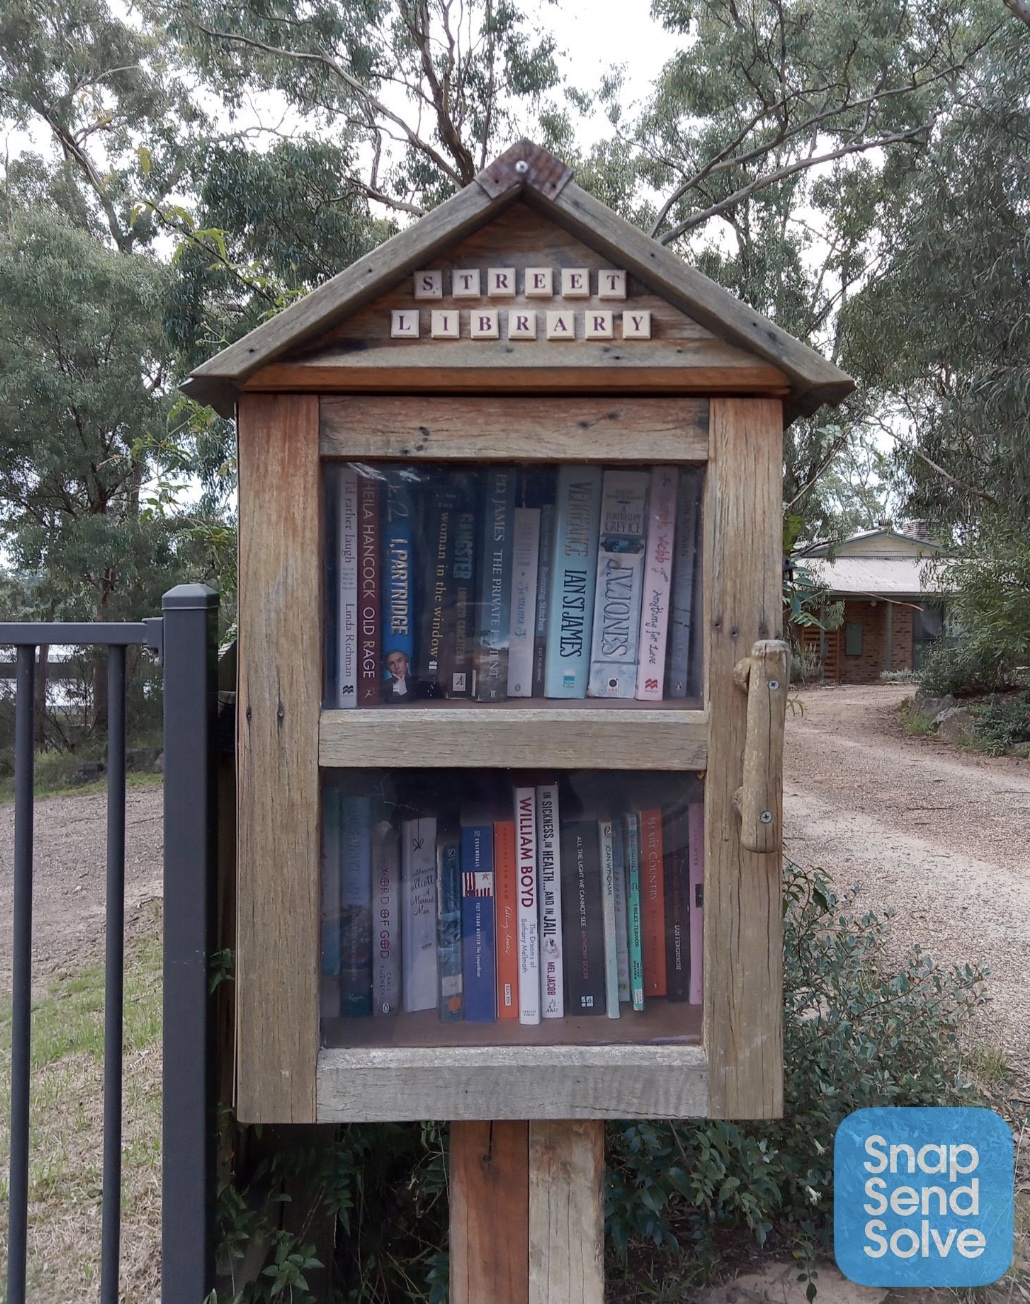 A simple Street Library